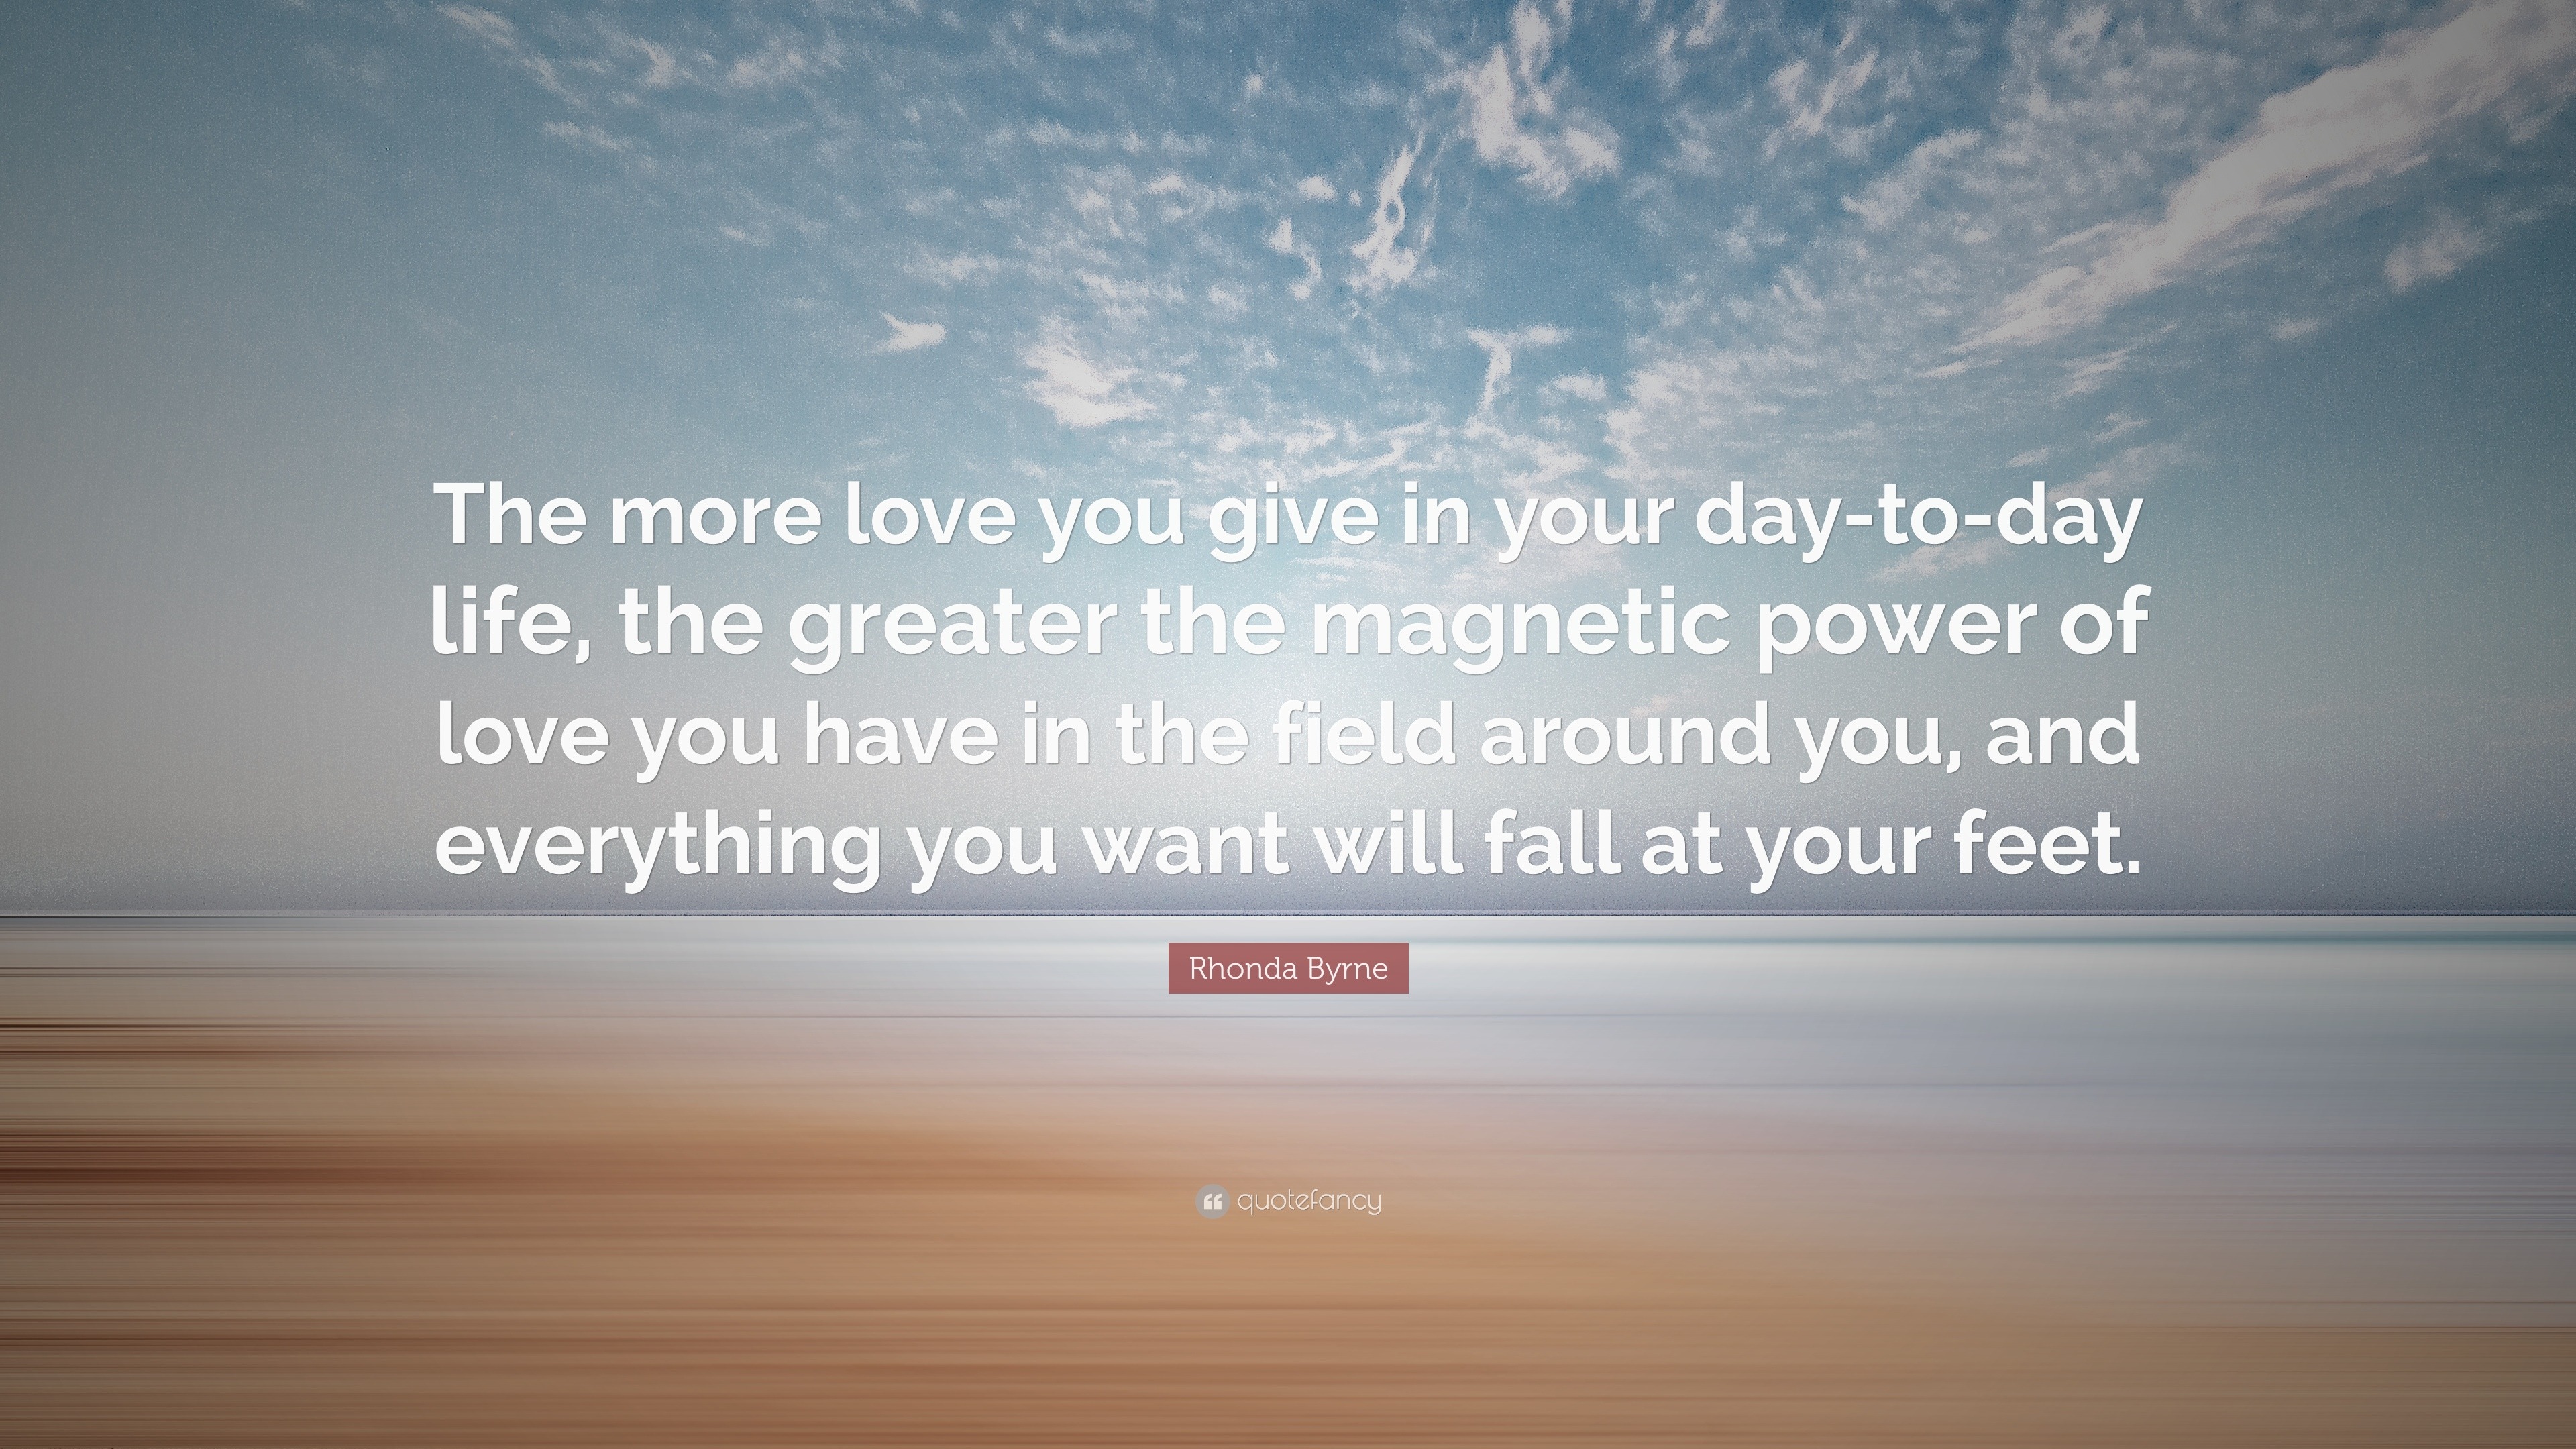 Rhonda Byrne Quote: “The more love you give in your day-to-day life ...